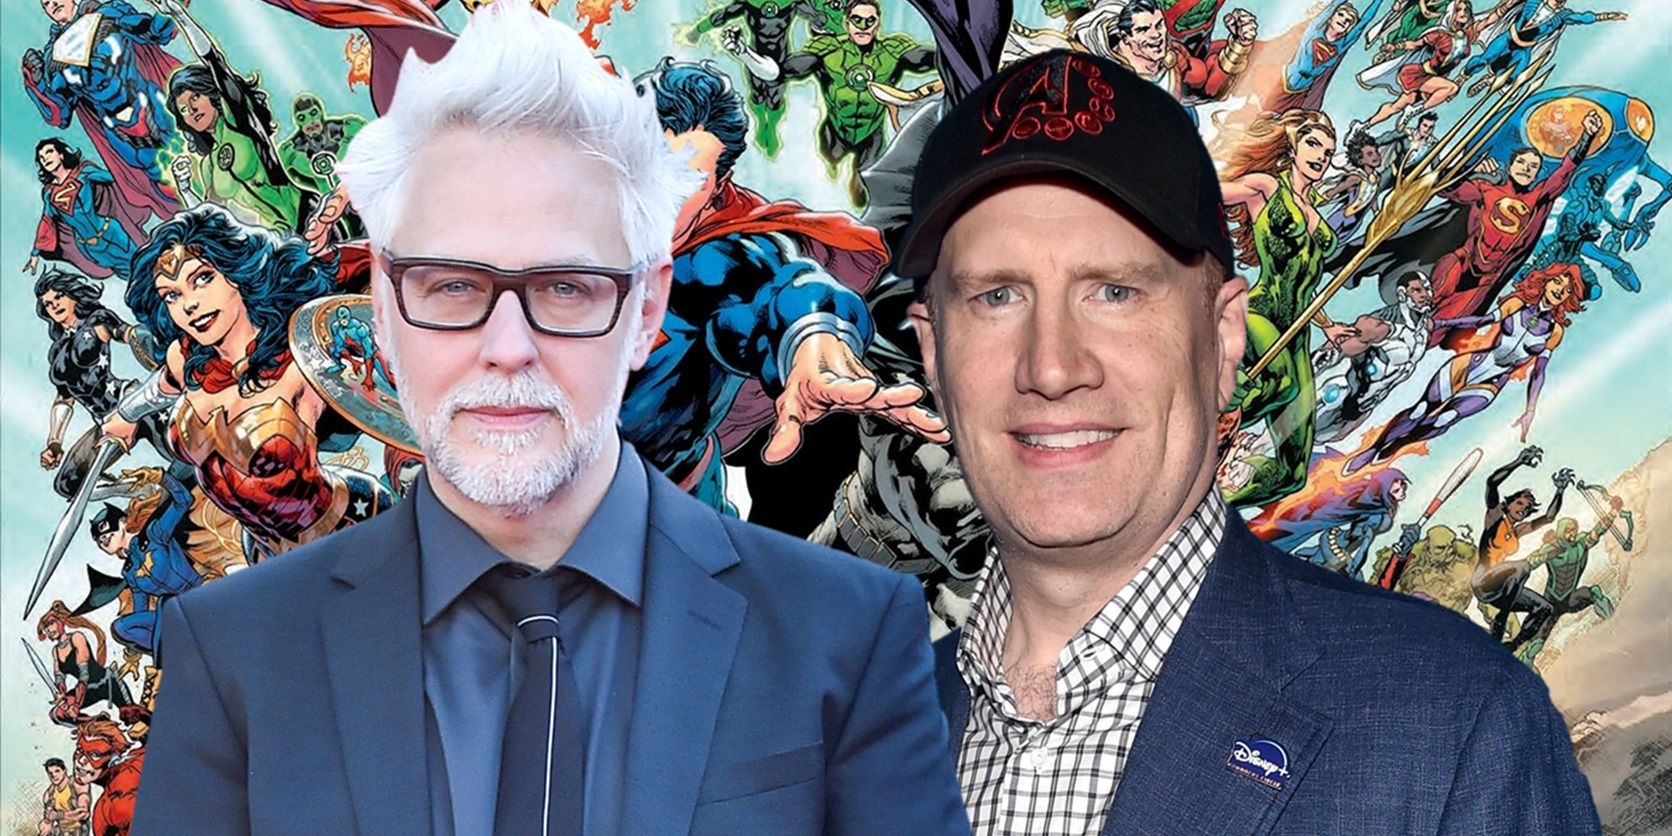 James_Gunn_and_Kevin_Feige_superimposed_over_DC_heroes